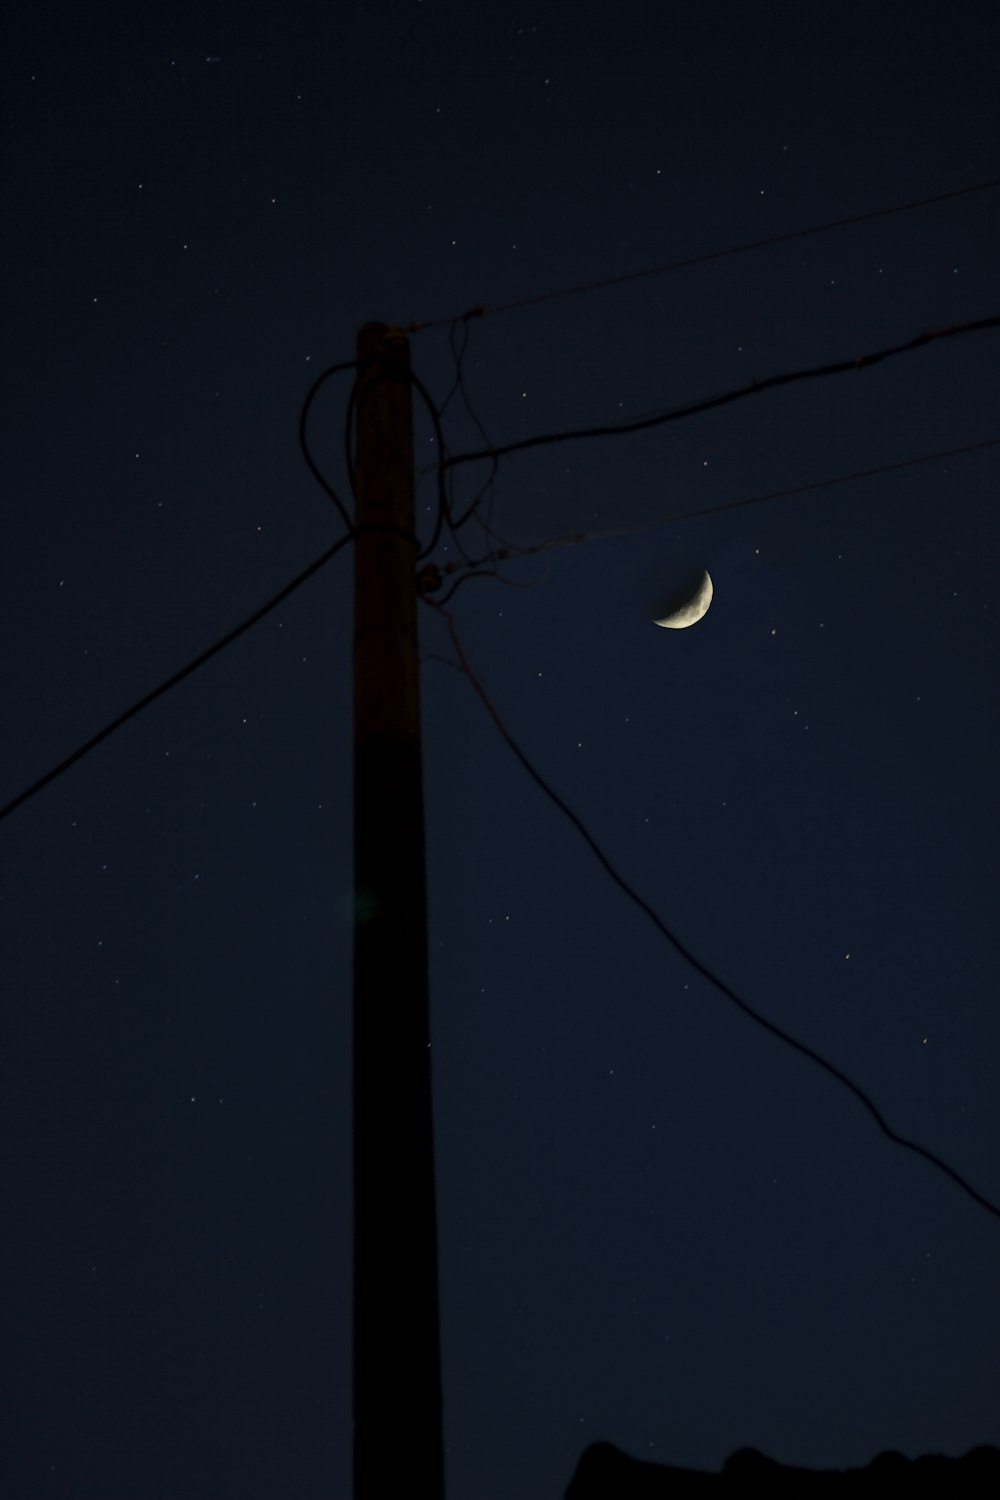 crescent moon over black sky during night time